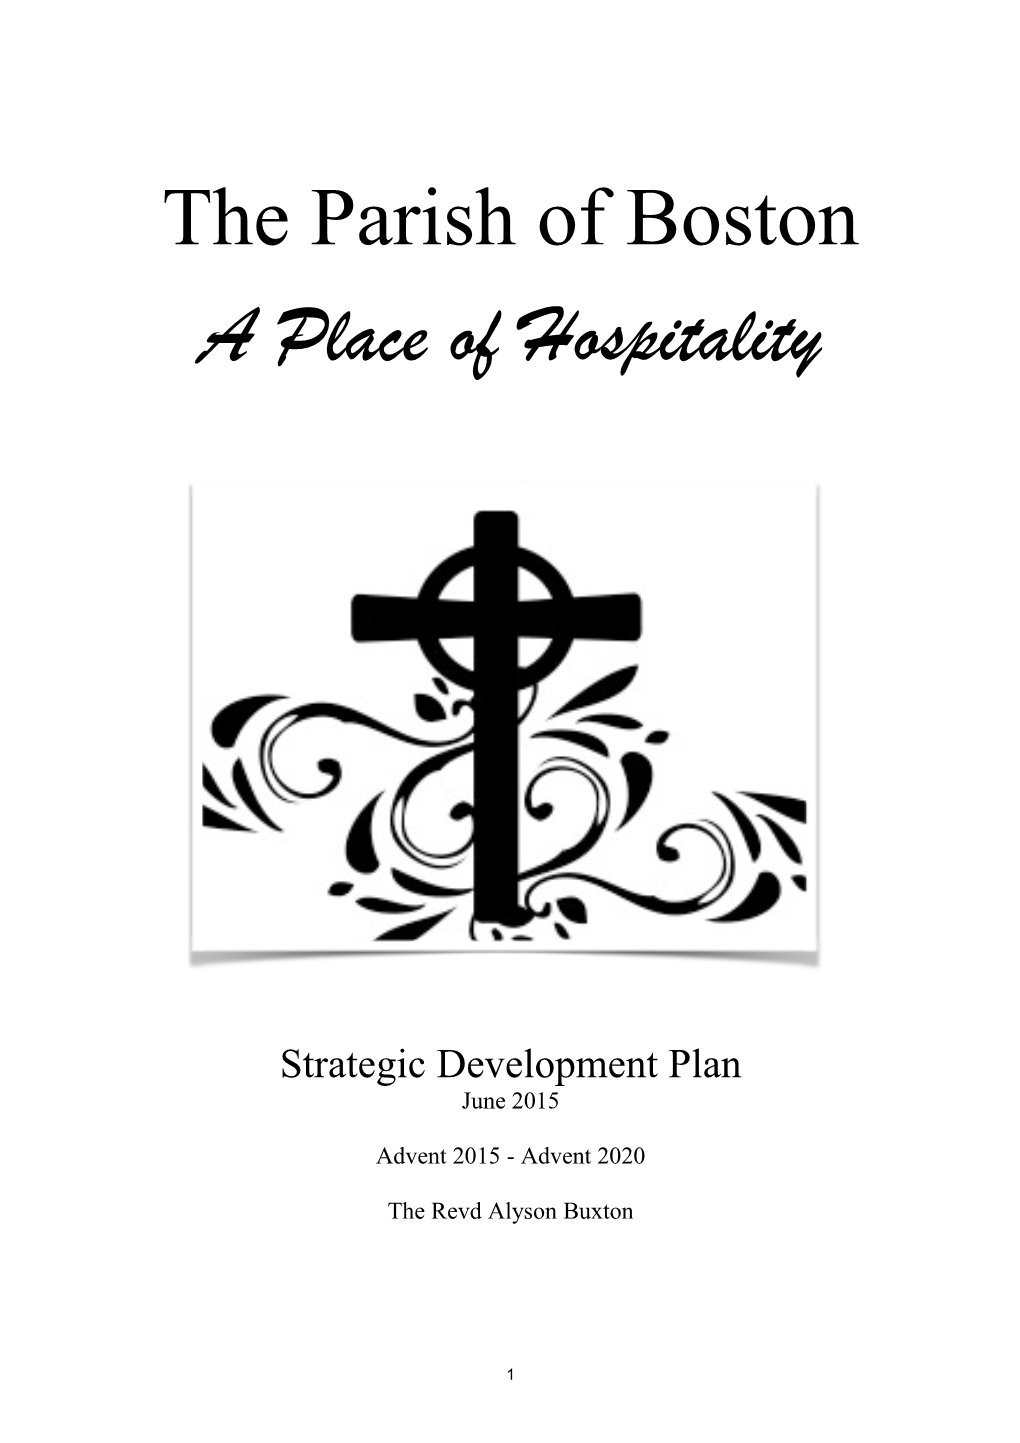 The Parish of Boston a Place of Hospitality